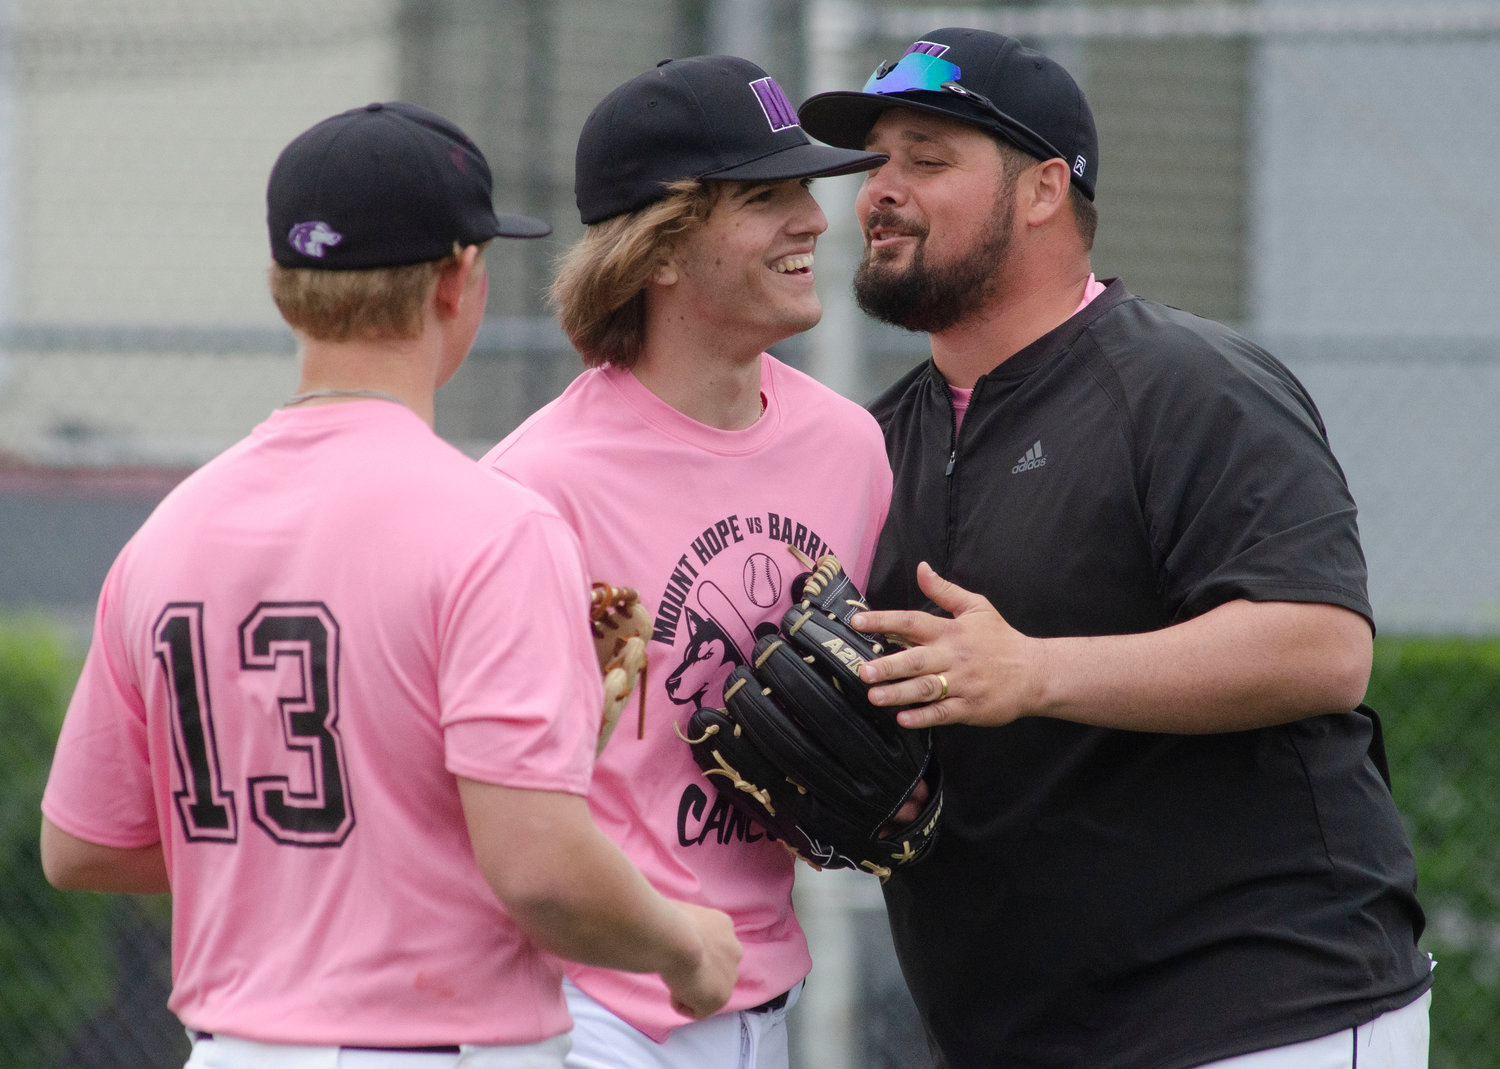 AJ Jones (left) looks on as Brad Denson celebrates with head coach Mike Mazzarella after the pitcher got out of a jam in the first inning.